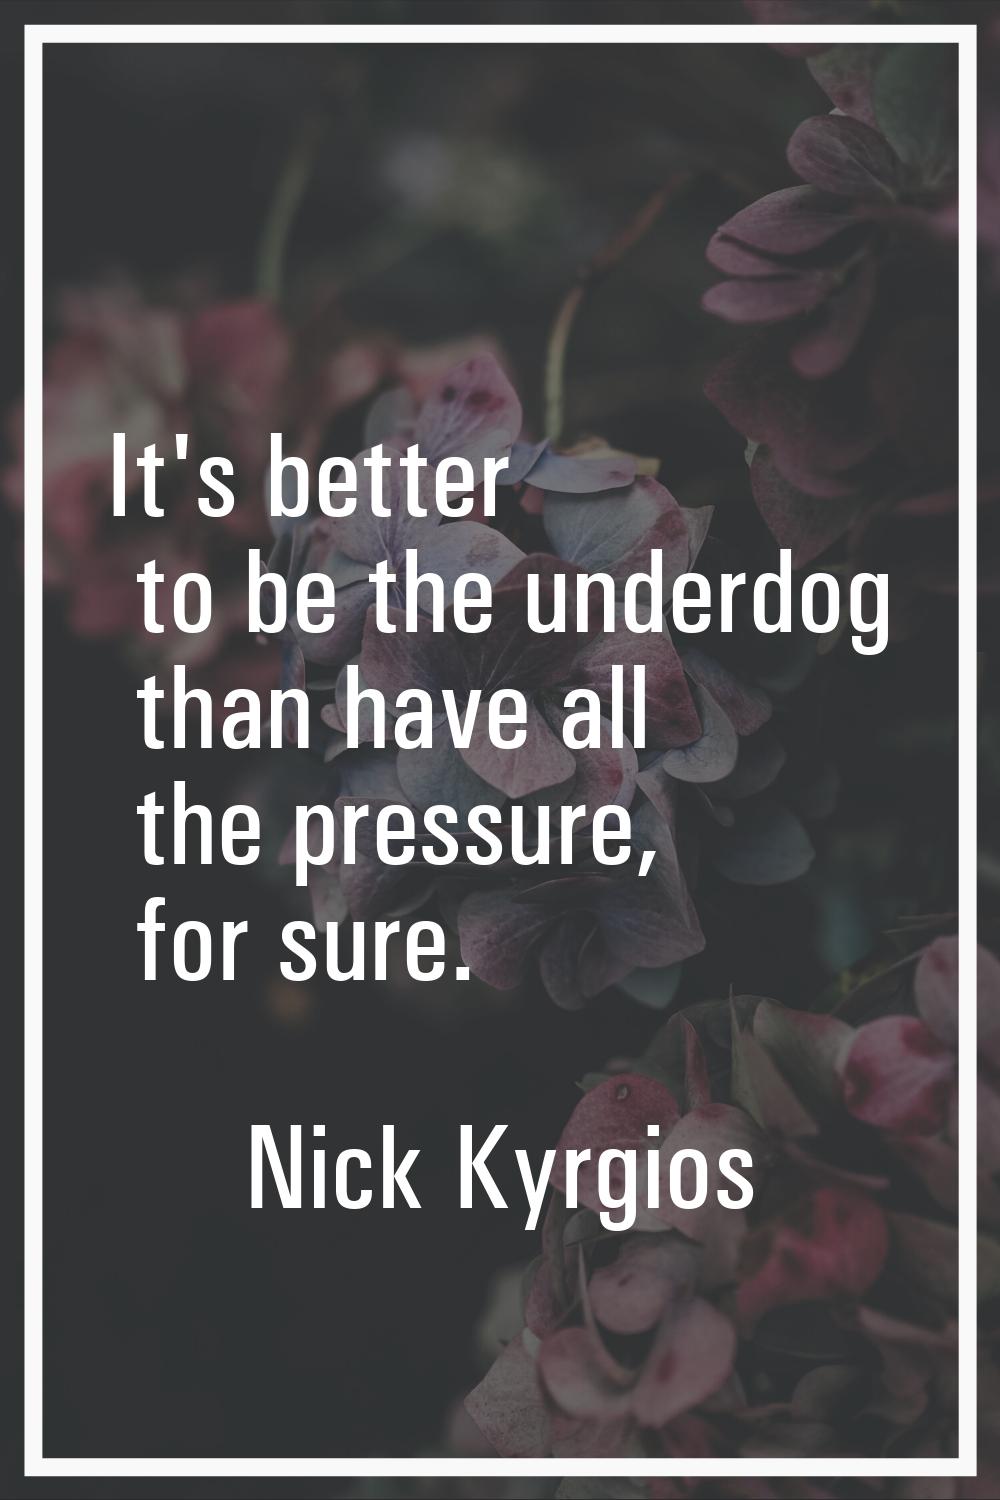 It's better to be the underdog than have all the pressure, for sure.